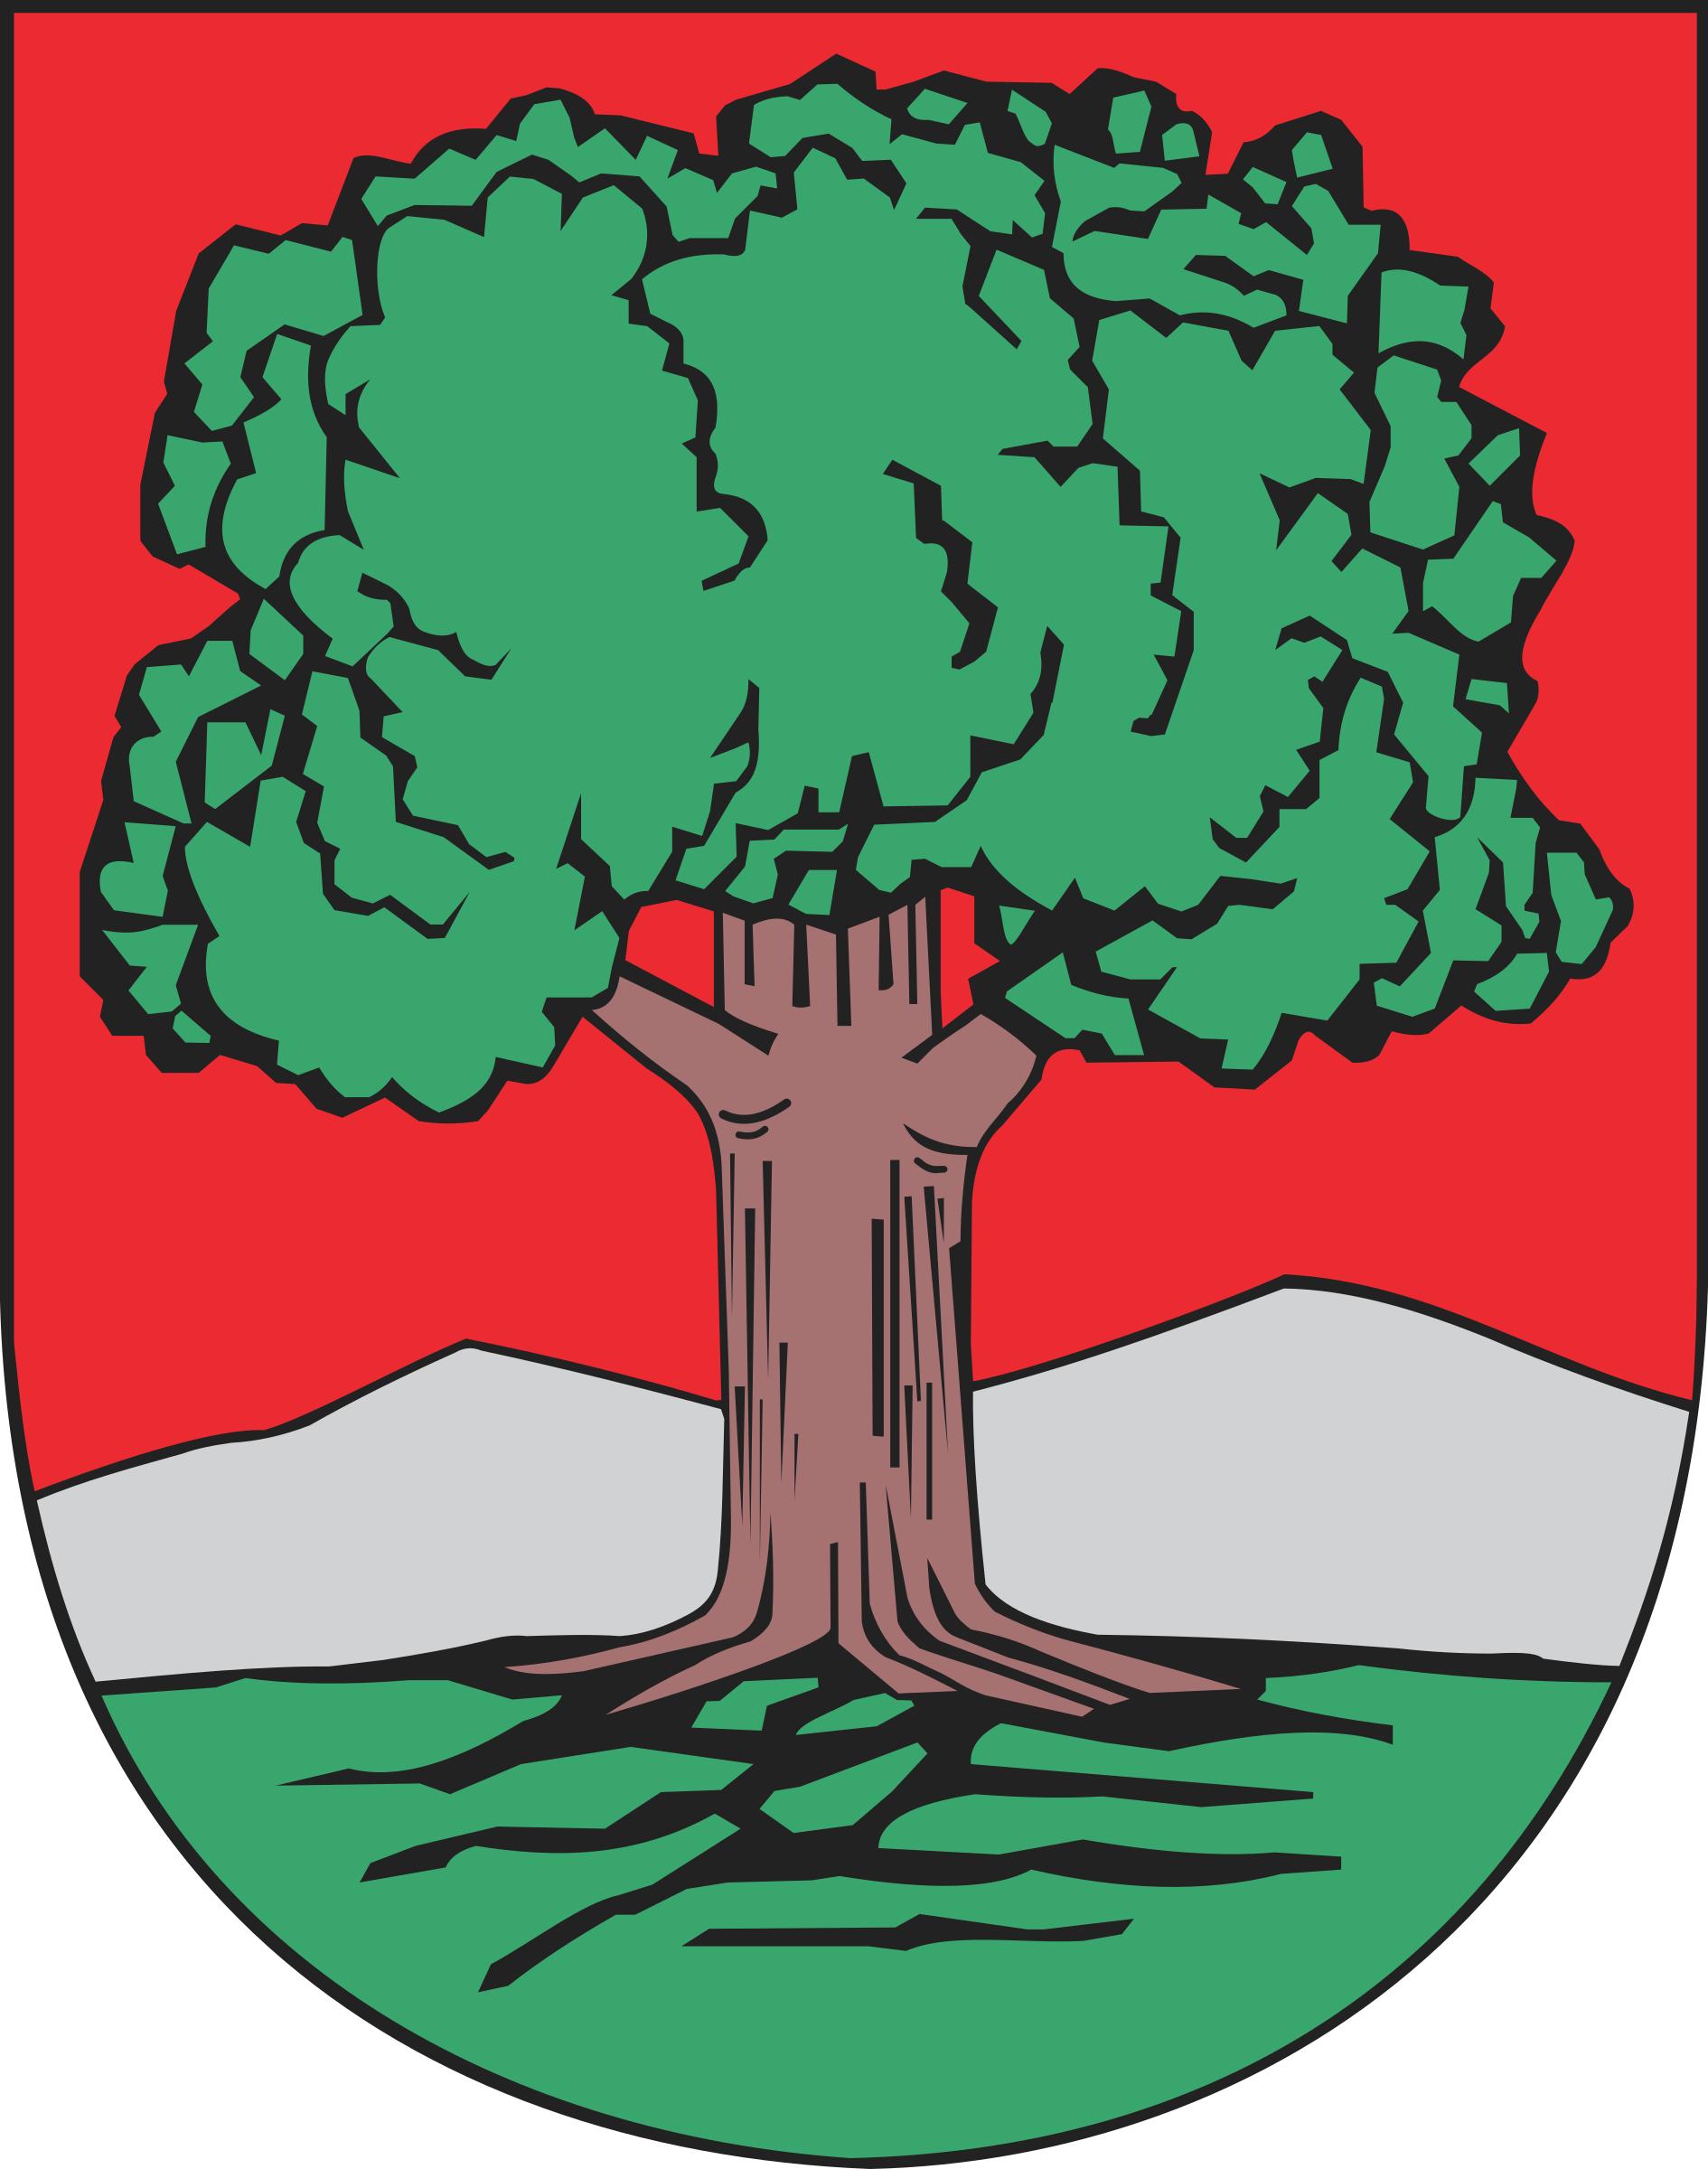 Walbrzych - coat of arms png